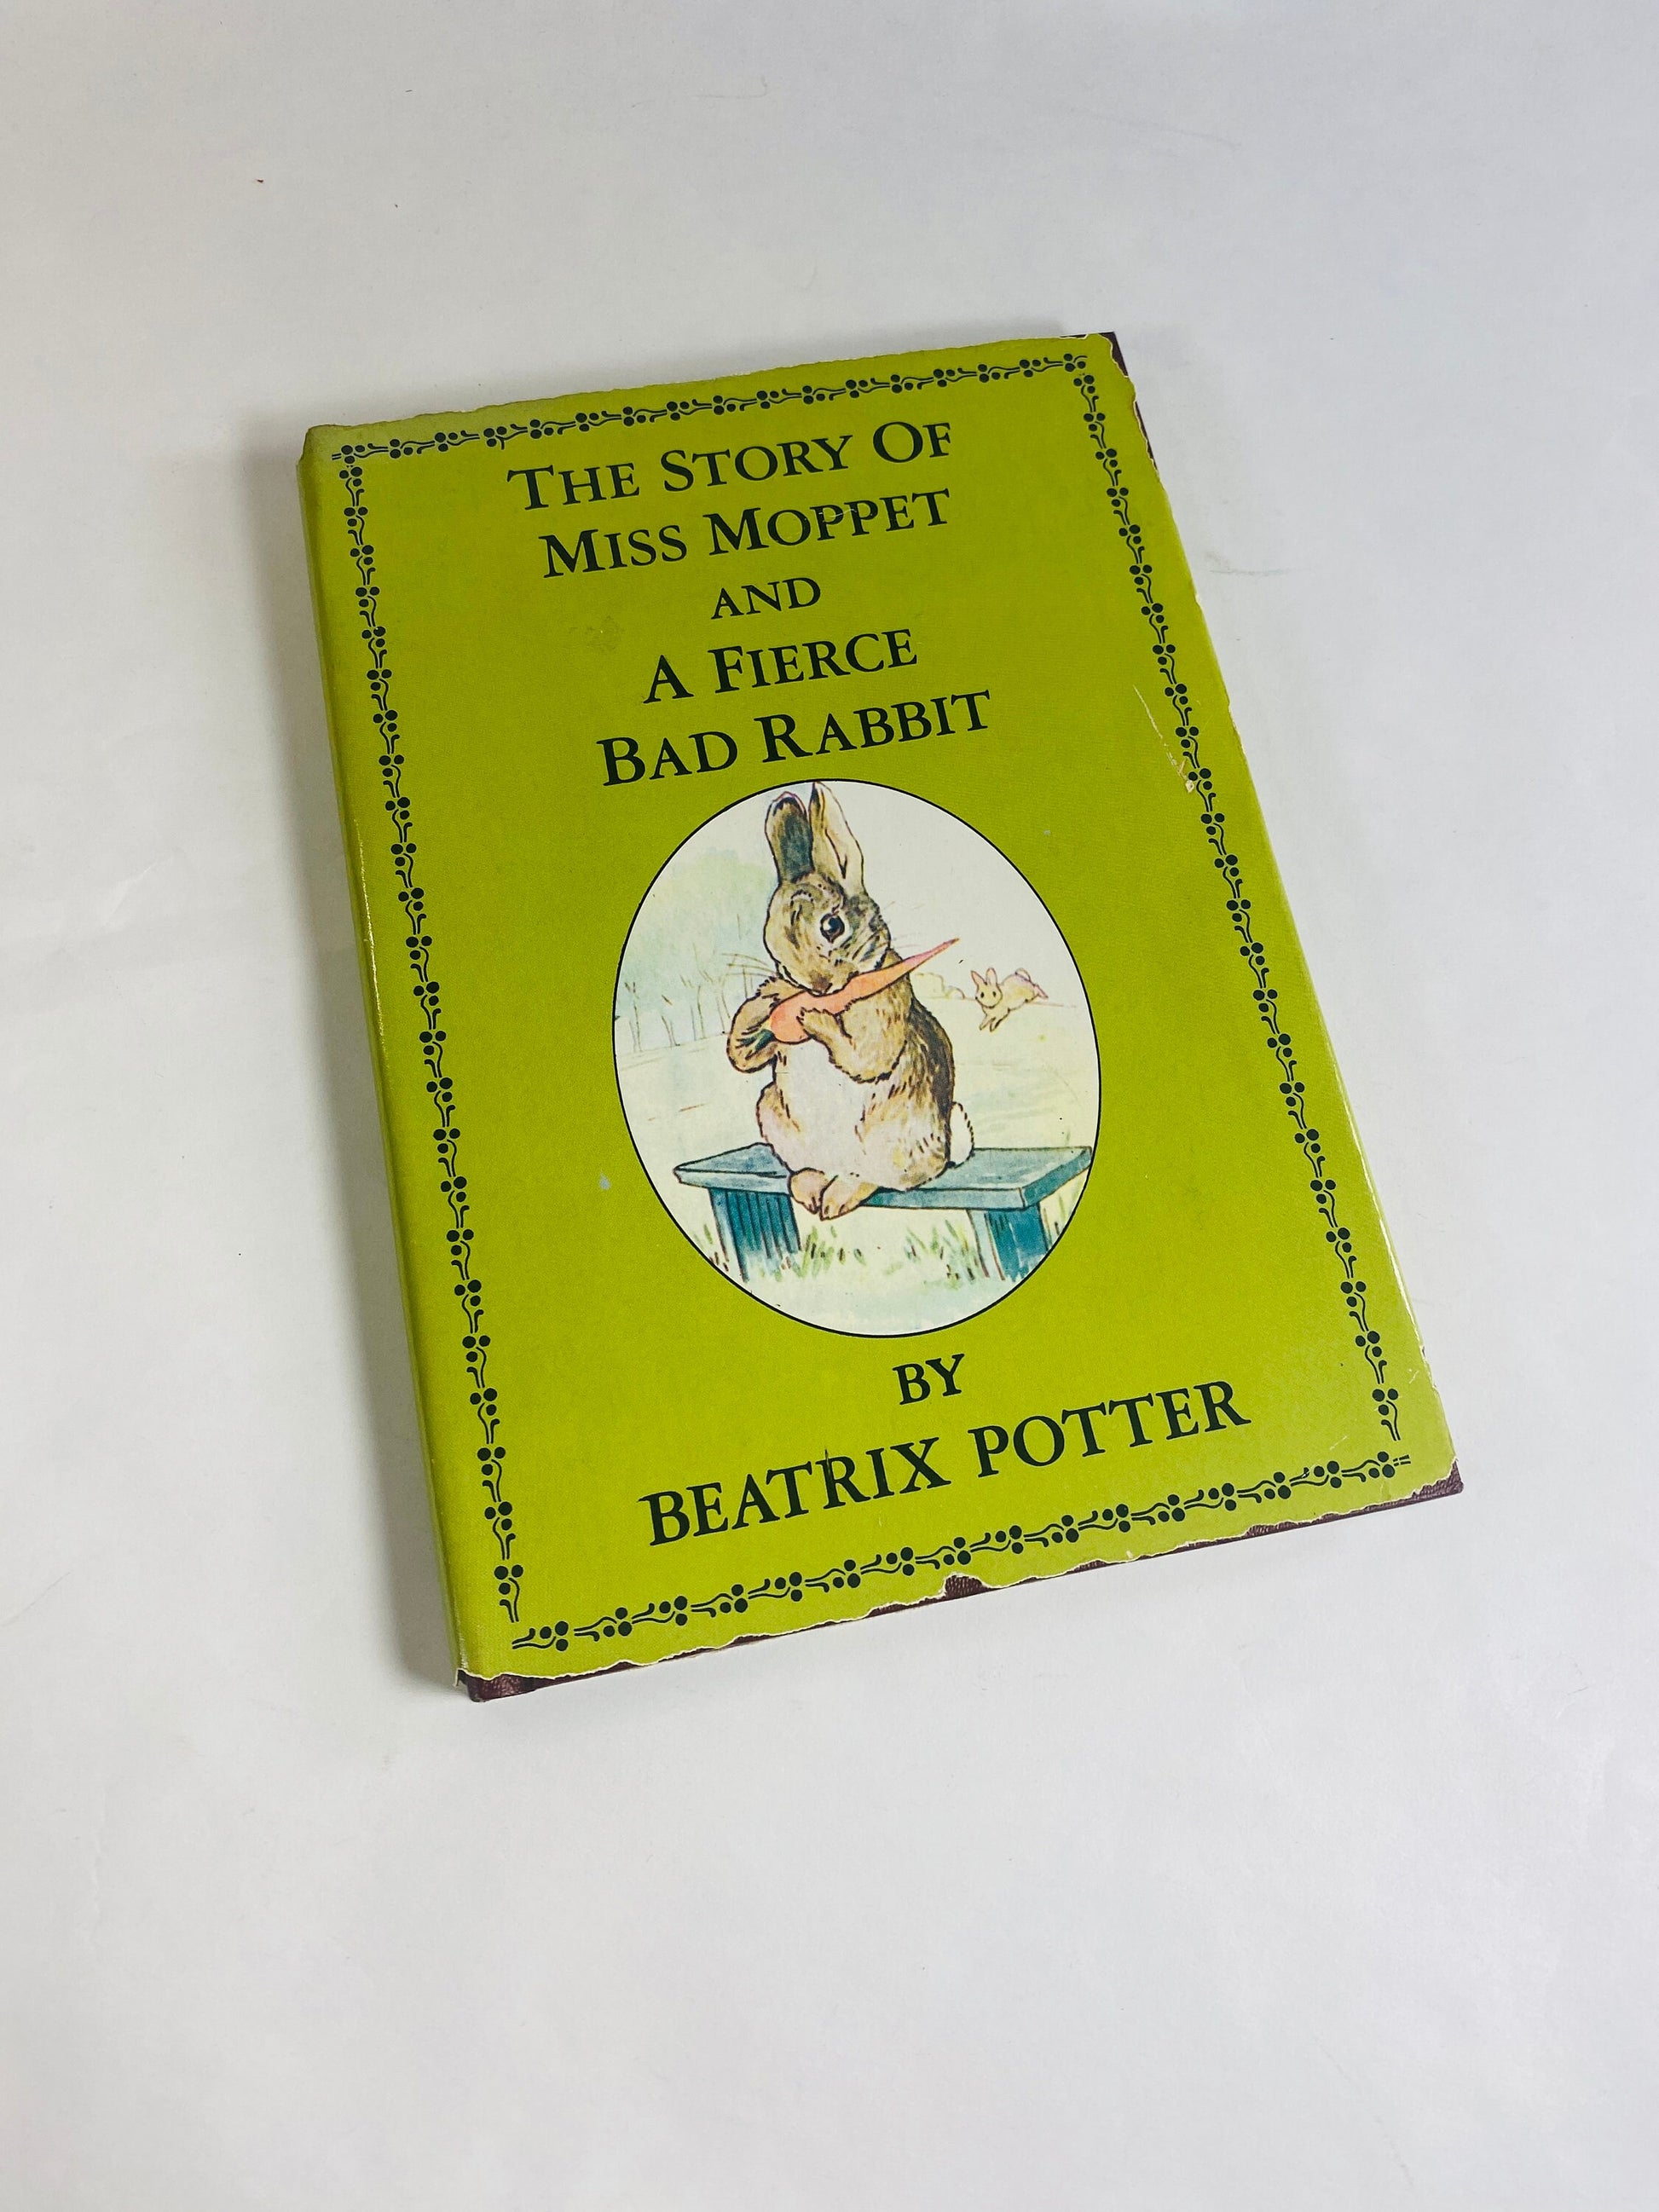 Story of Miss Moppet and a Fierce Bad Rabbit by Beatrix Potter vintage children's book circa 1987. Tale of Peter Rabbit.